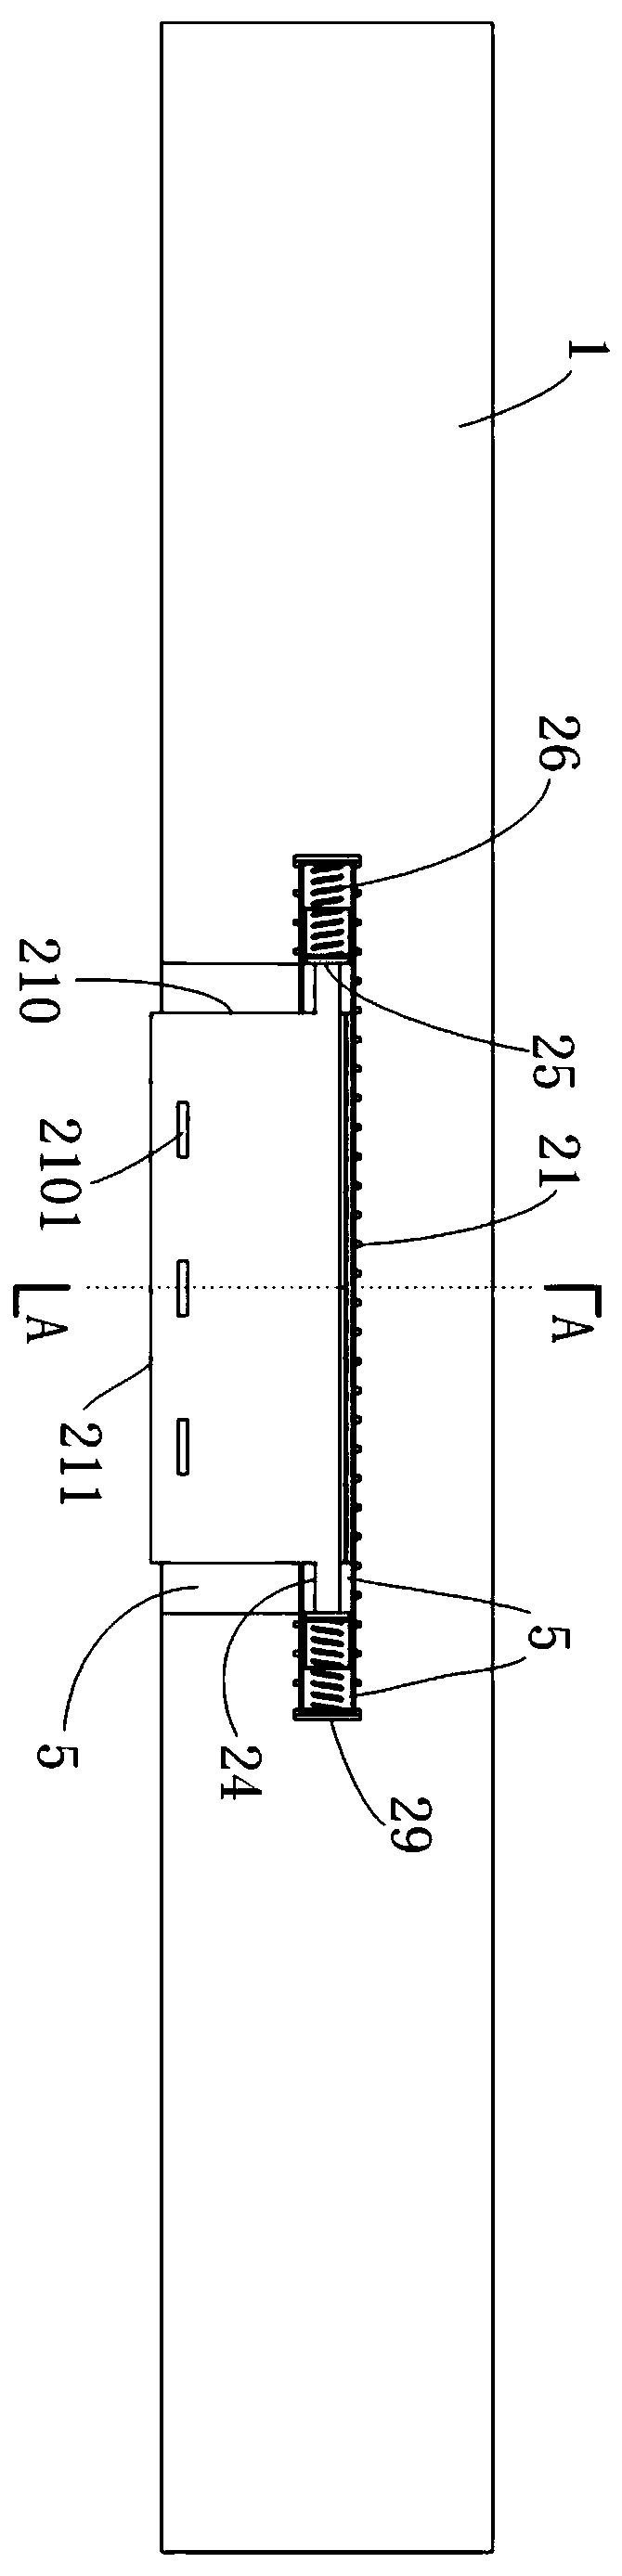 Energy dissipation beam embedded with viscoelastic layer